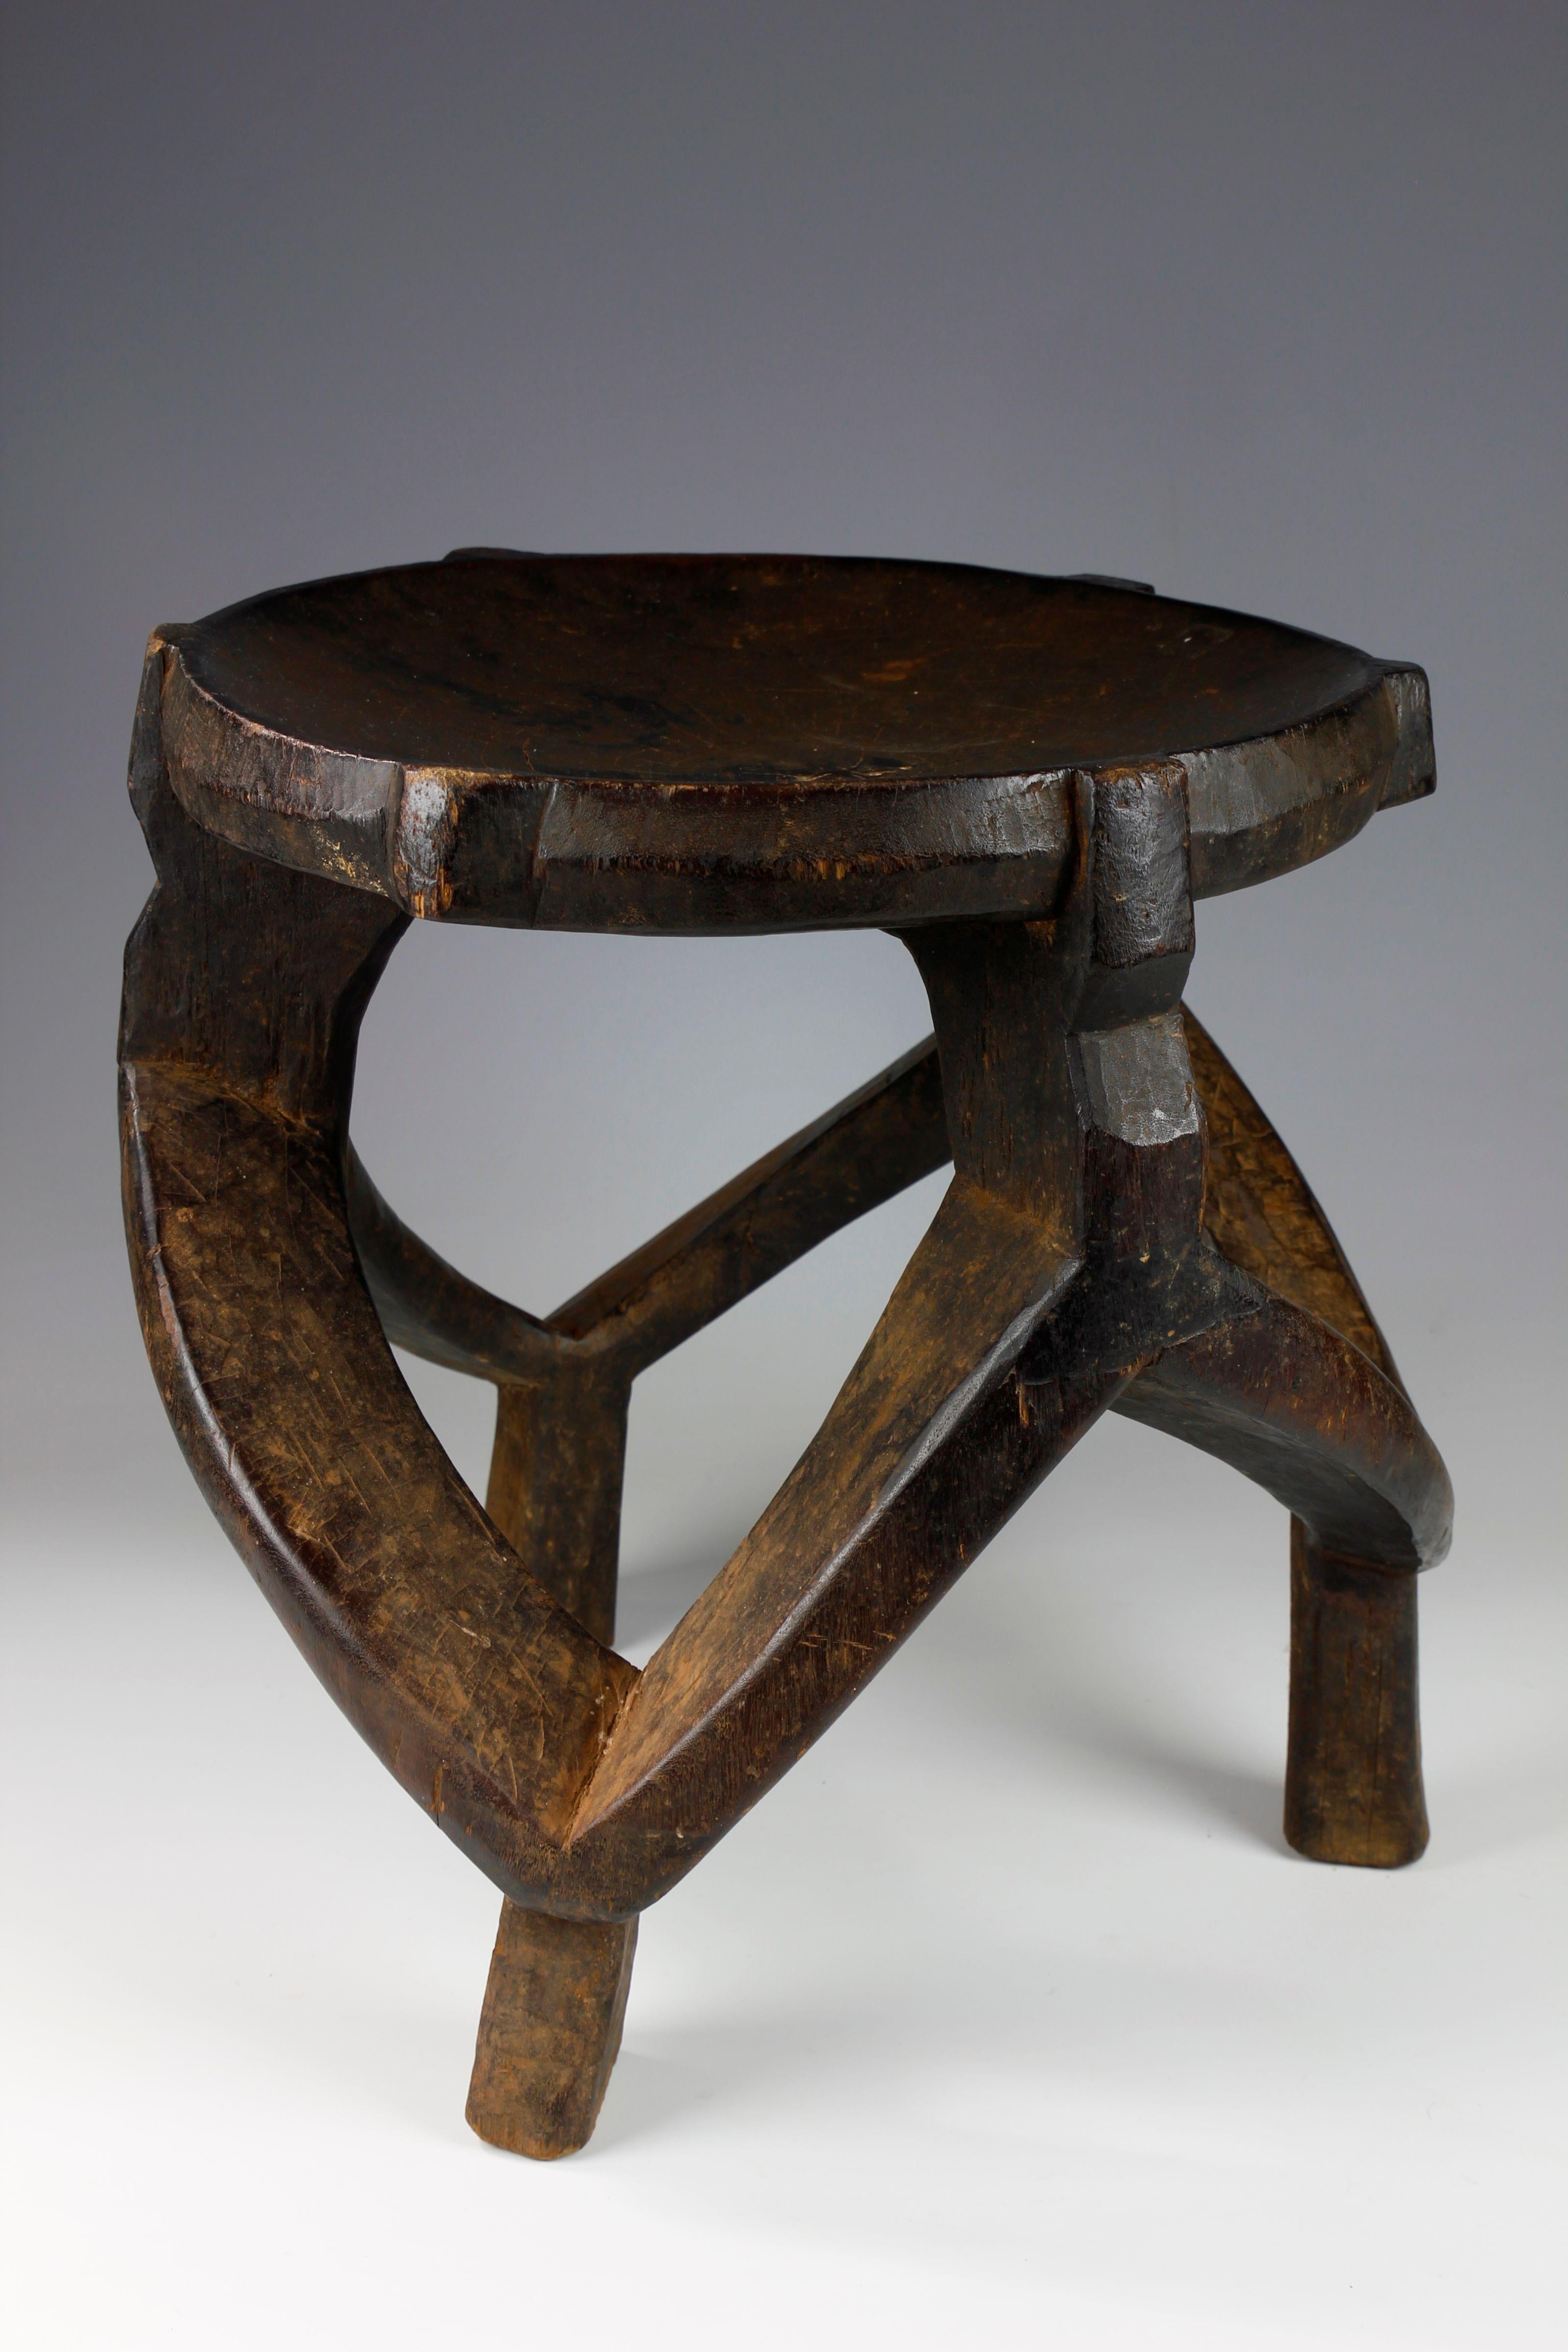 This beautifully carved title stool, from the Gogo culture in Tanzania, features a wonderful looped and adjoining structure. Dating back to the mid-twentieth century, this fine example of a Tanzanian chieftain's stool exhibits a deep, dark surface